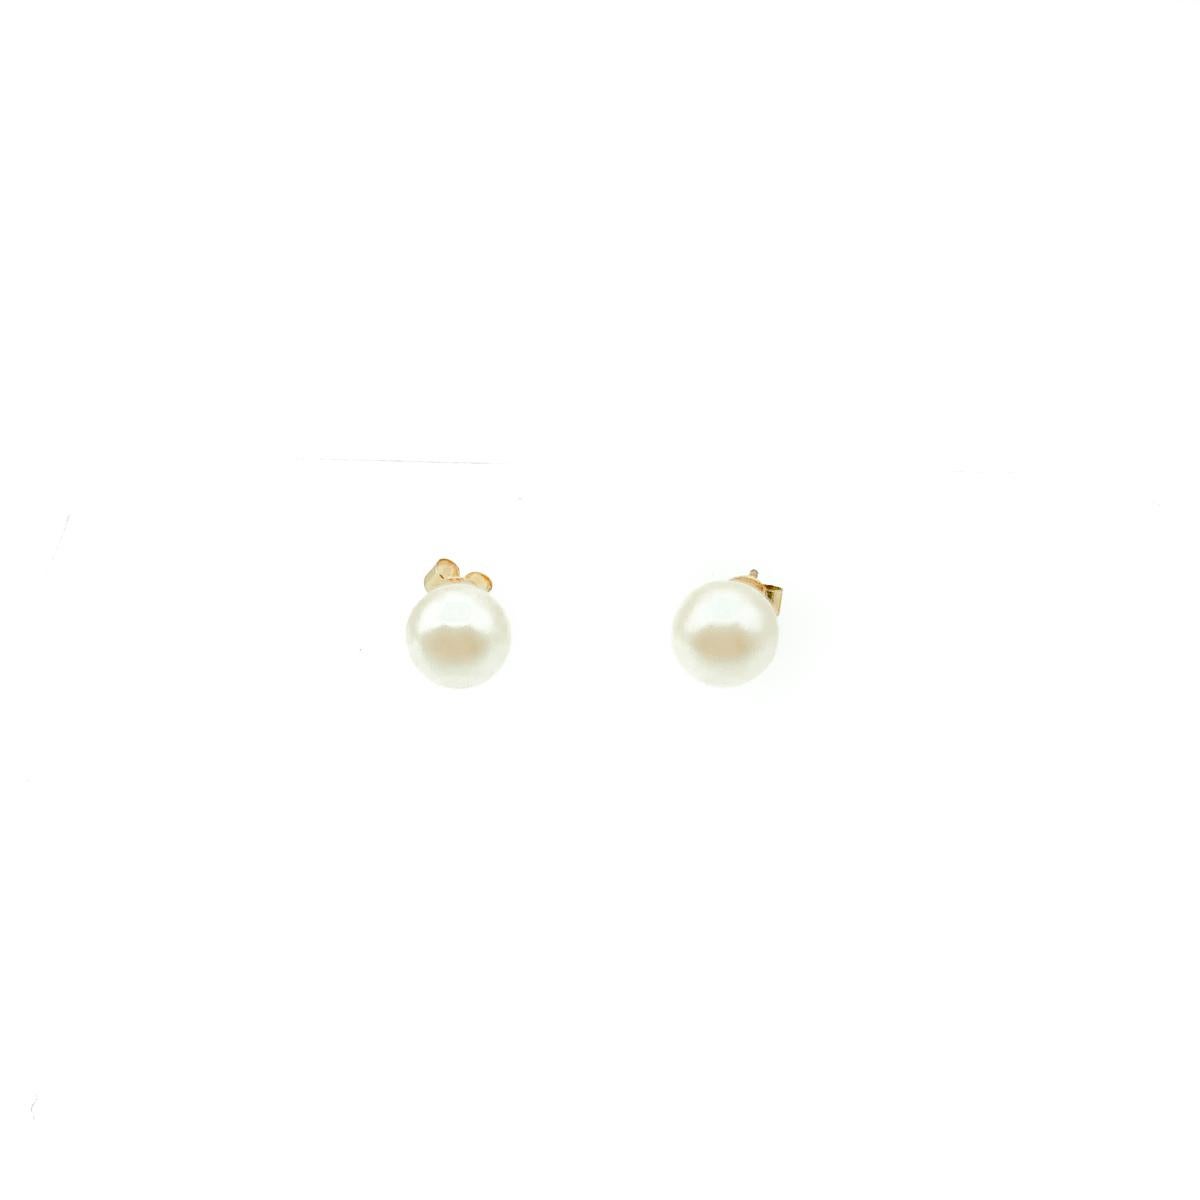 A pair of Vintage Gold Cultured Pearl Earrings. Crafted with a half drilled cultured pearl sitting on a 9ct gold post. 

Very good vintage condition, approx 0.6cms pearl diameter. 

A perfect jewel box staple that will prove invaluable time and time